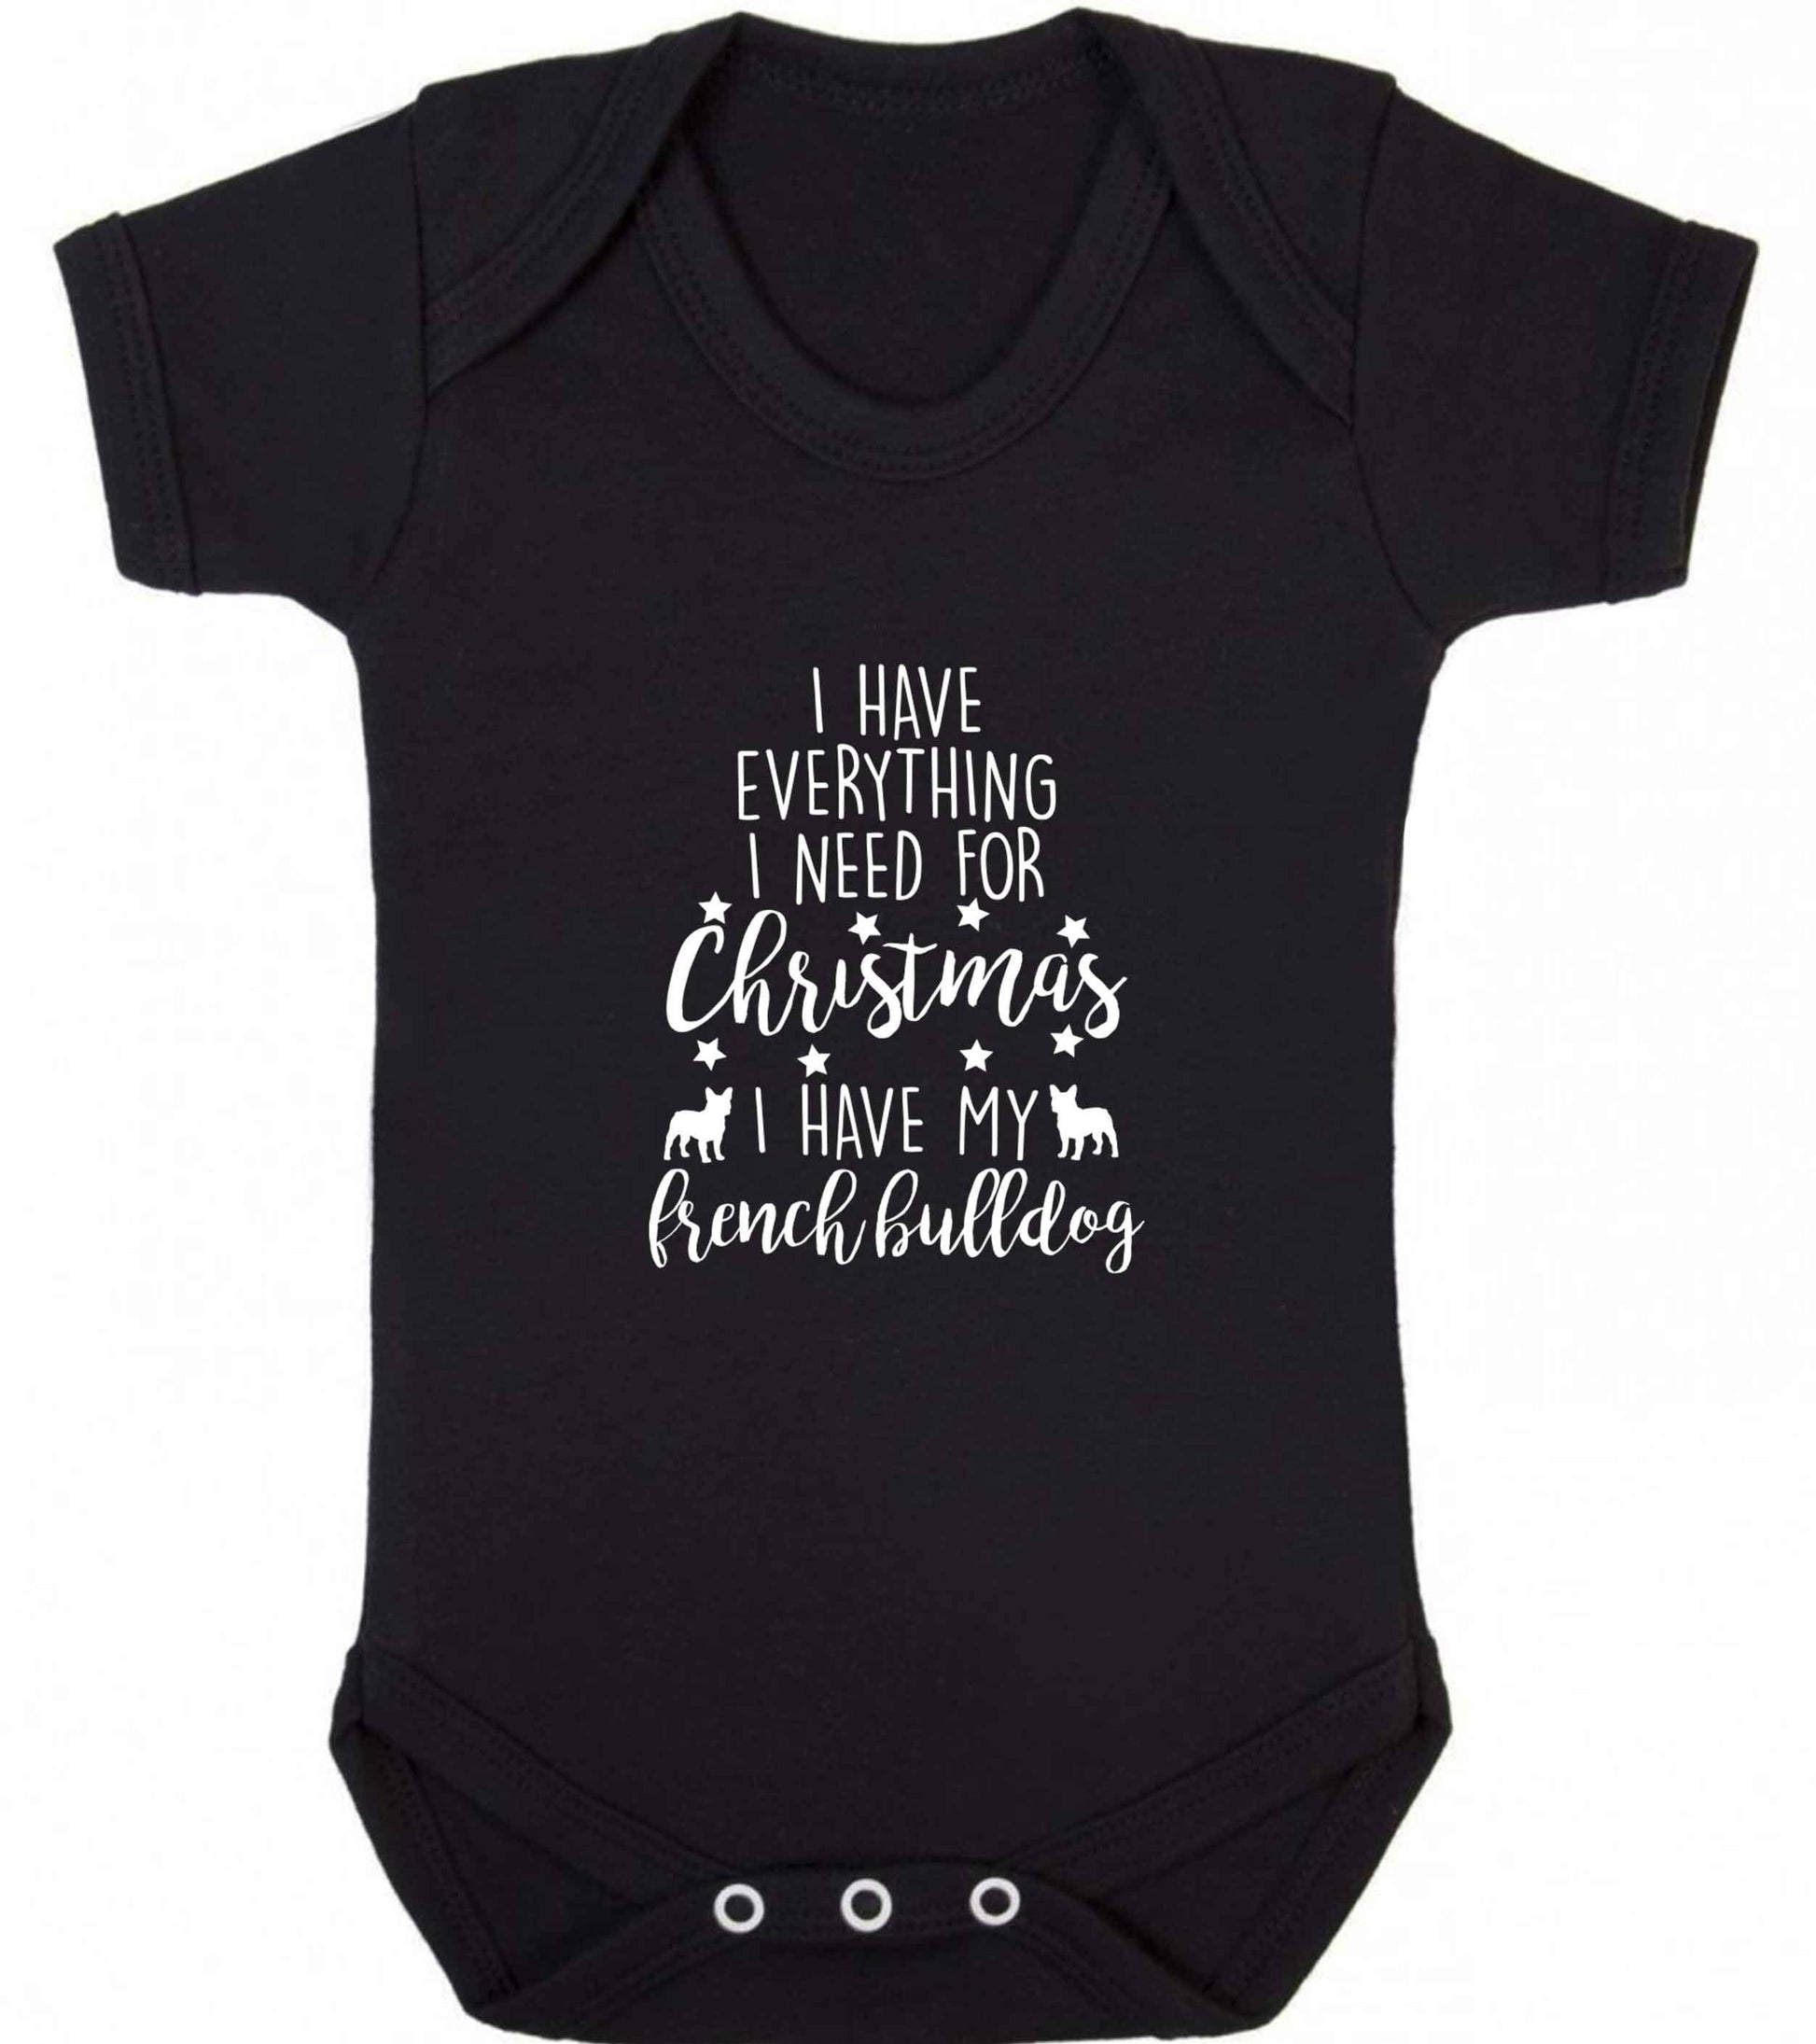 I have everything I need for Christmas I have my french bulldog baby vest black 18-24 months